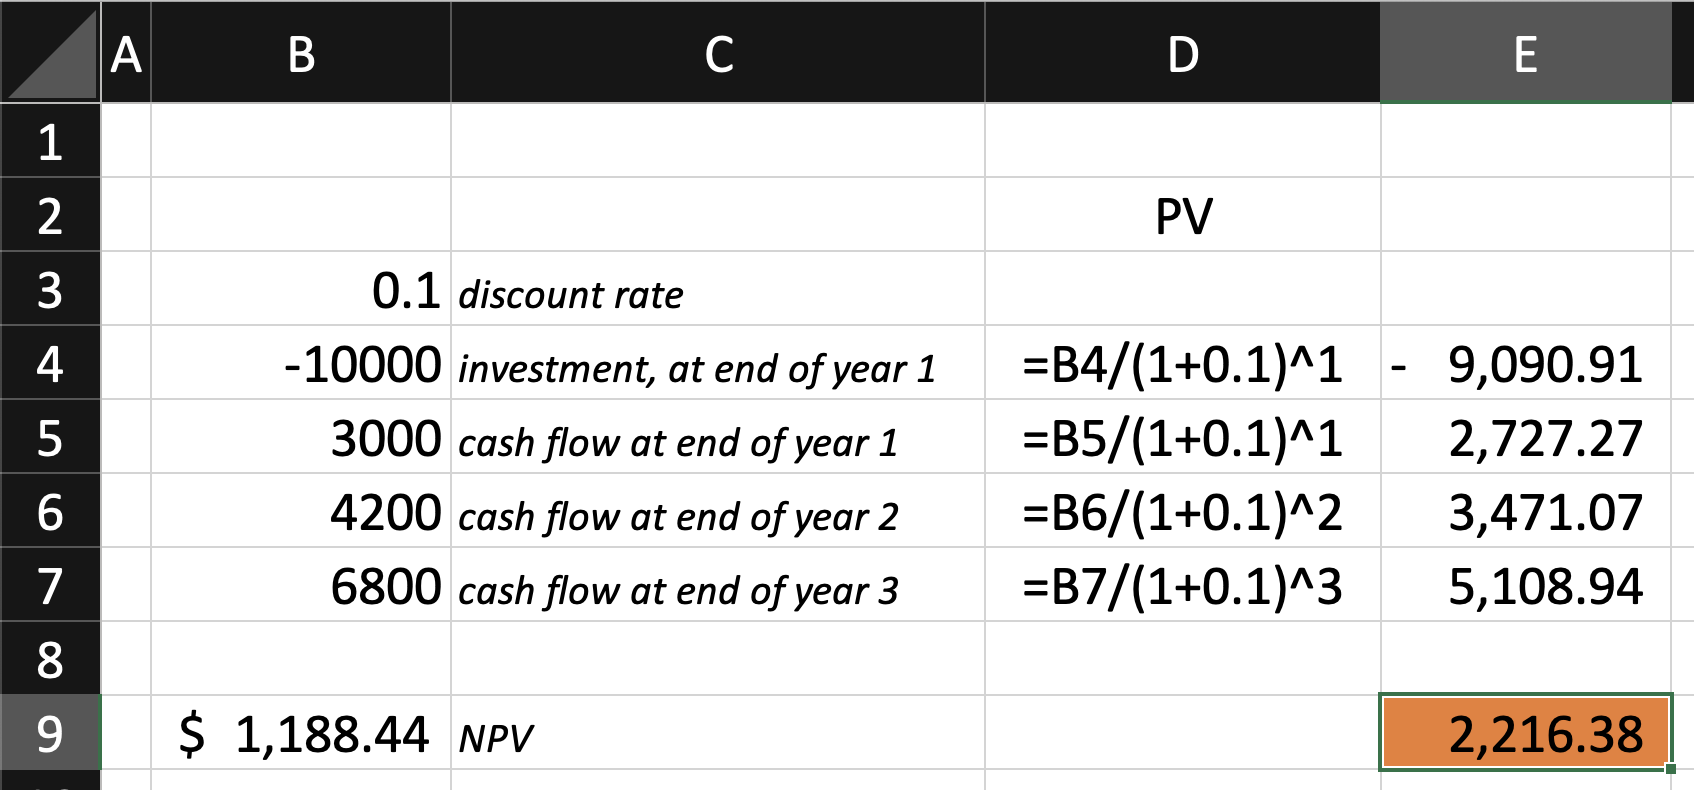 NPV Calculation In Excel Is Wrong